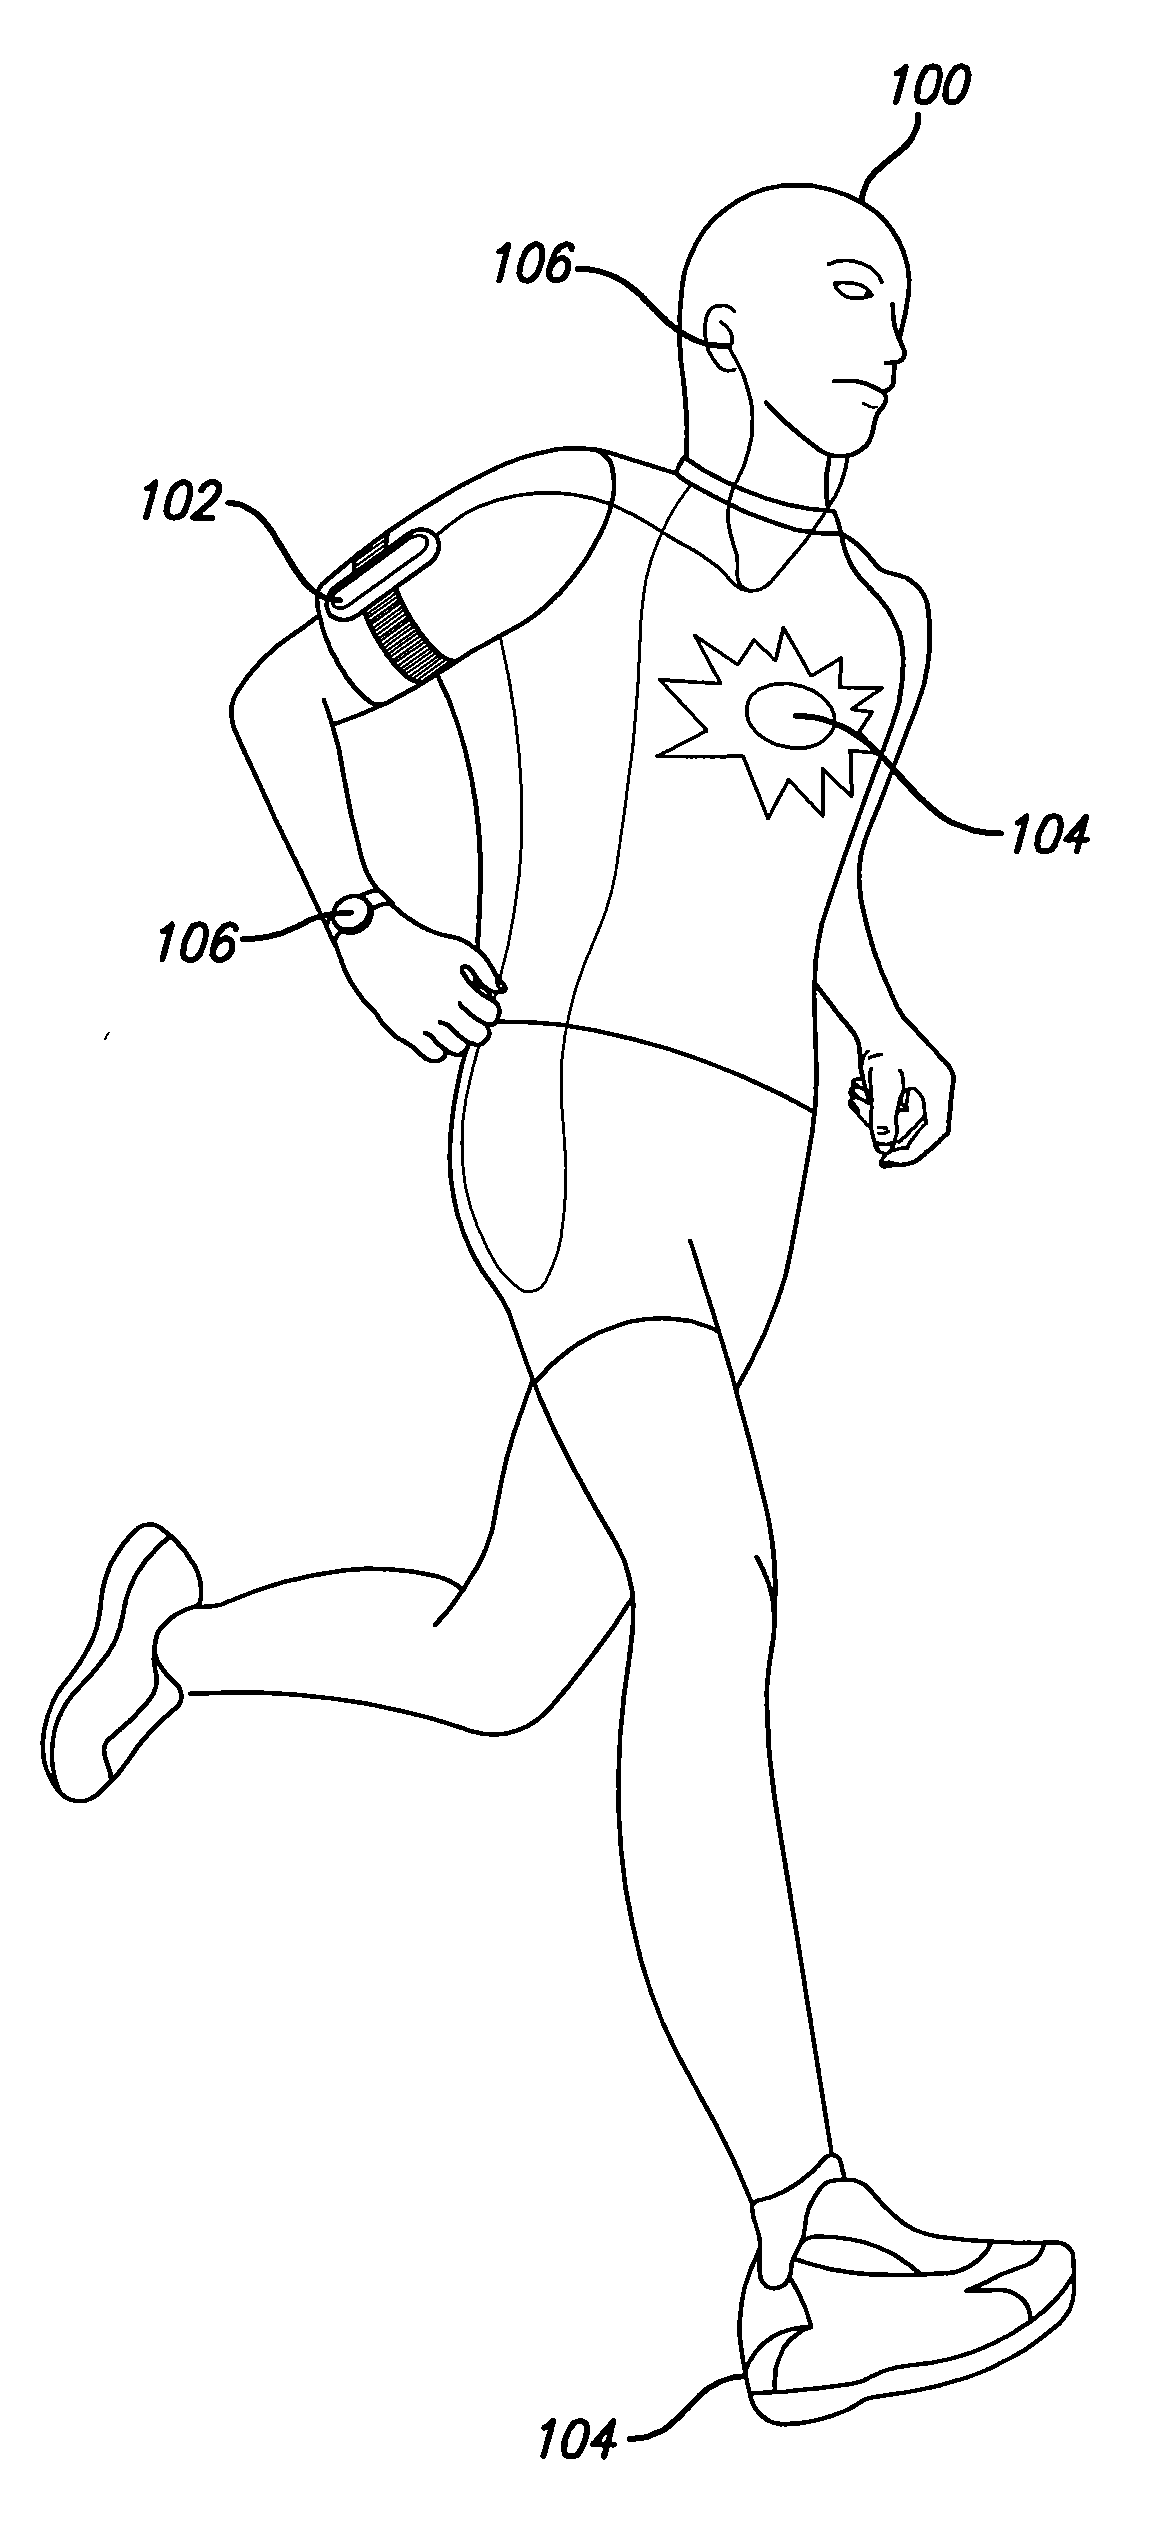 Program Products, Methods, and Systems for Providing Fitness Monitoring Services